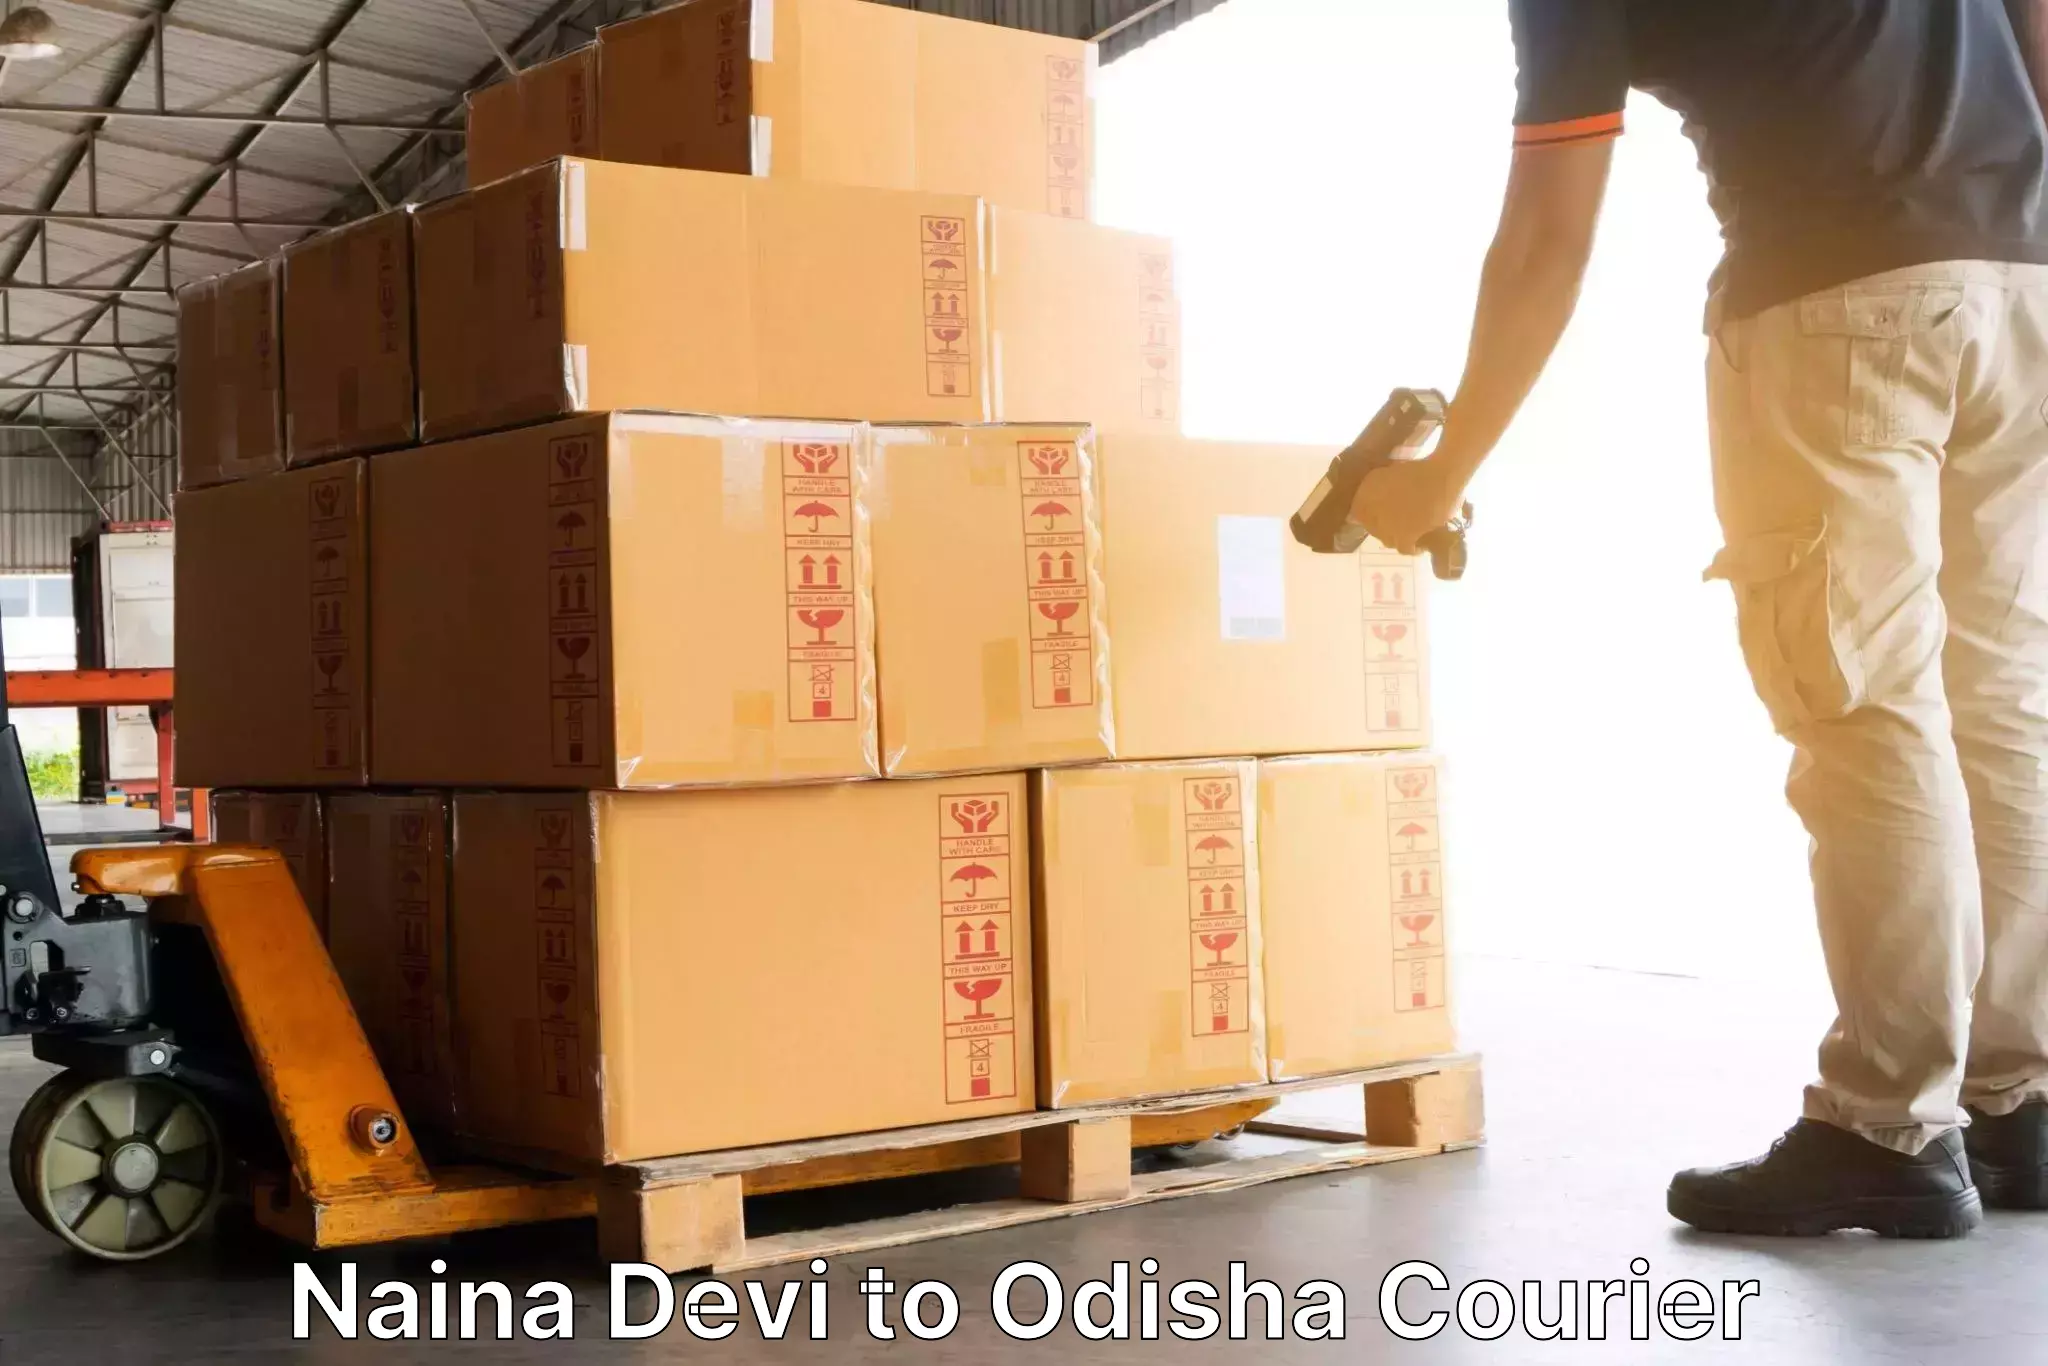 Nationwide parcel services Naina Devi to Mathili